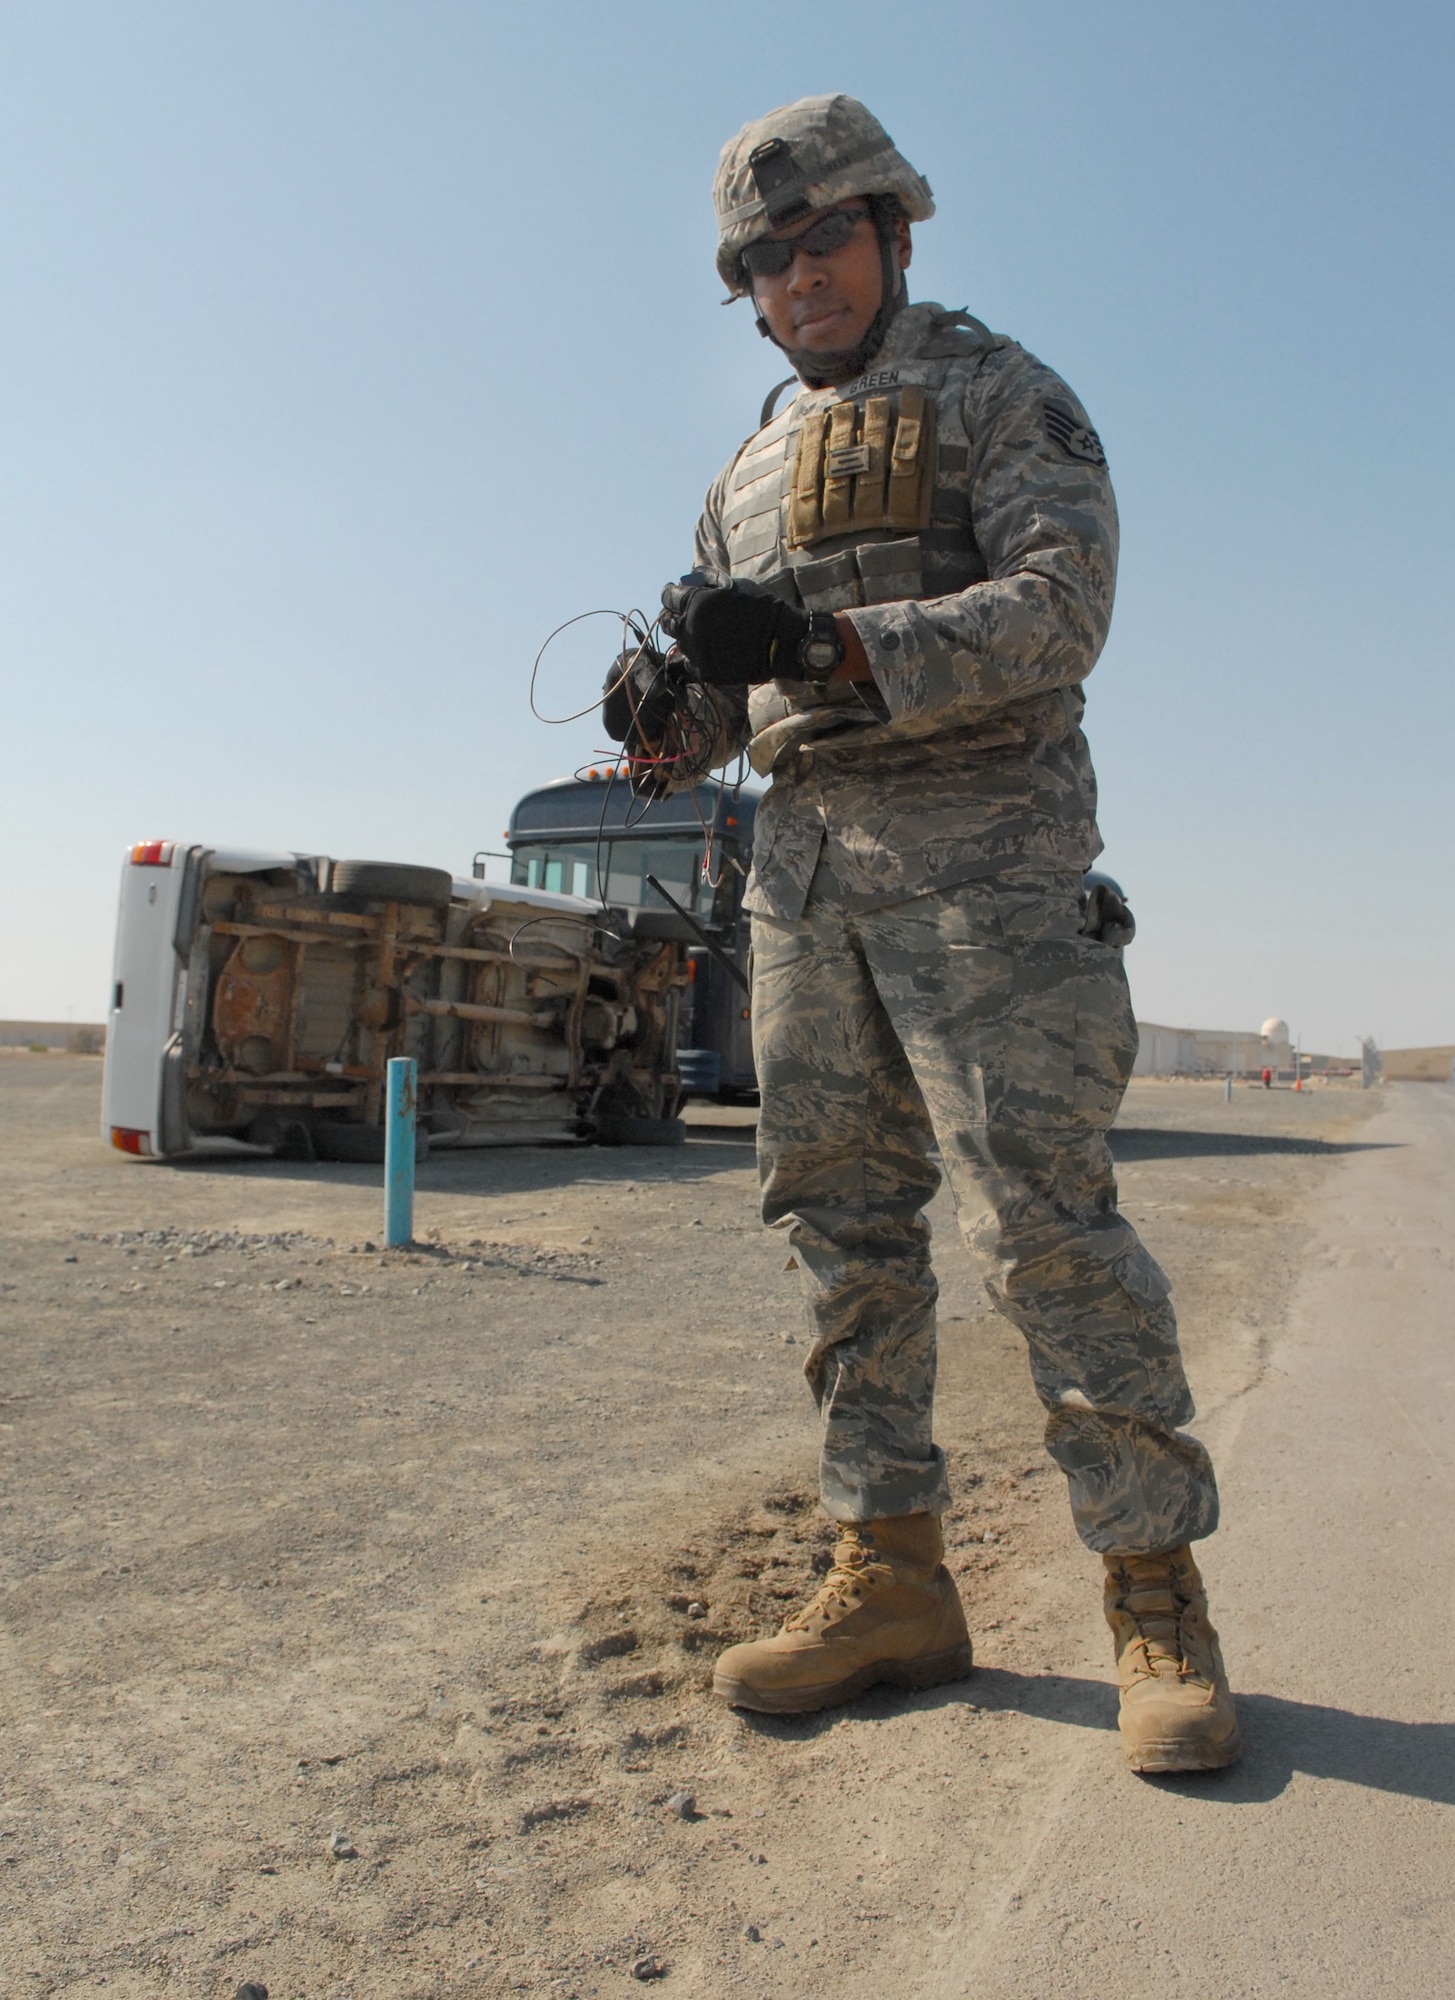 SOUTHWEST ASIA -- Staff Sgt. Keith Green, 380th Expeditionary Civil Engineer Explosive Ordnance Flight technician, collects pieces of a simulated Improvised Explosive Device after a simulated terrorist attack here Dec. 12. The deployed Airmen are all part of an exercise which tests and evaluates the 380th Air Expeditionary Wing's response to real-world scenarios. (US Air Force photo by Tech. Sgt. Denise Johnson) (released)